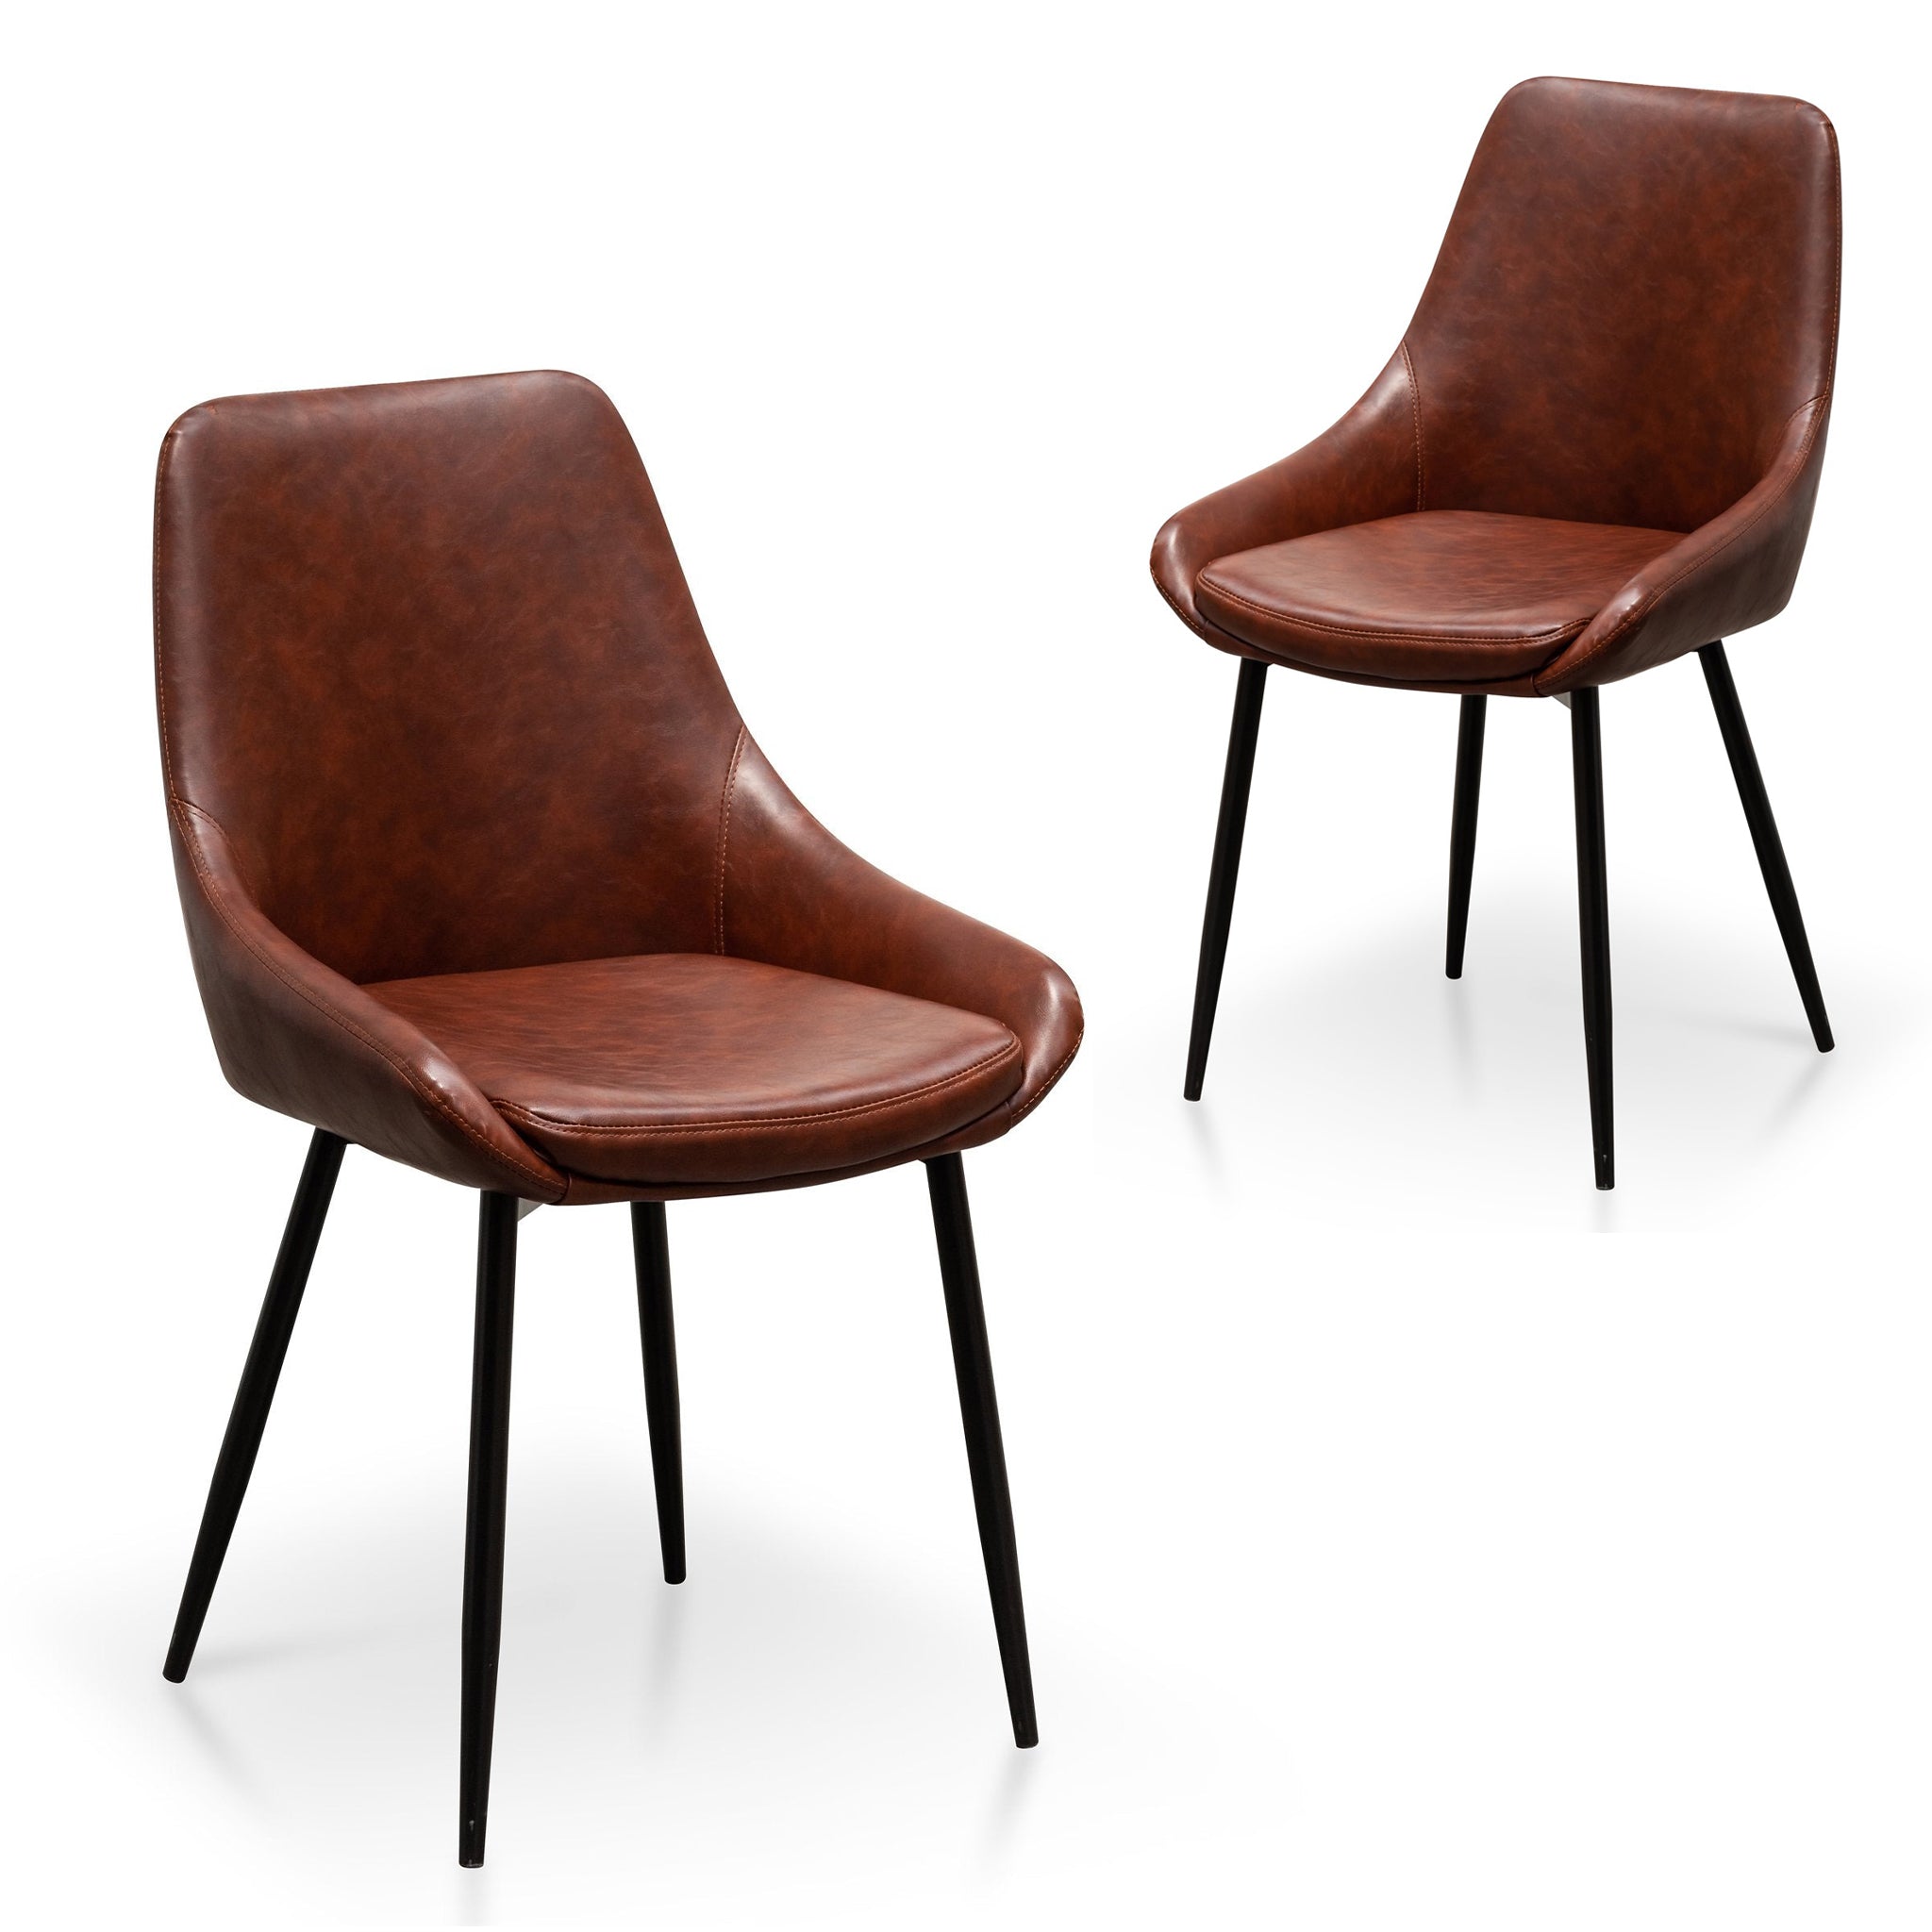 Set of 2 Millie Dining Chair - Cinnamon Brown PU Leather - Dining Chairs